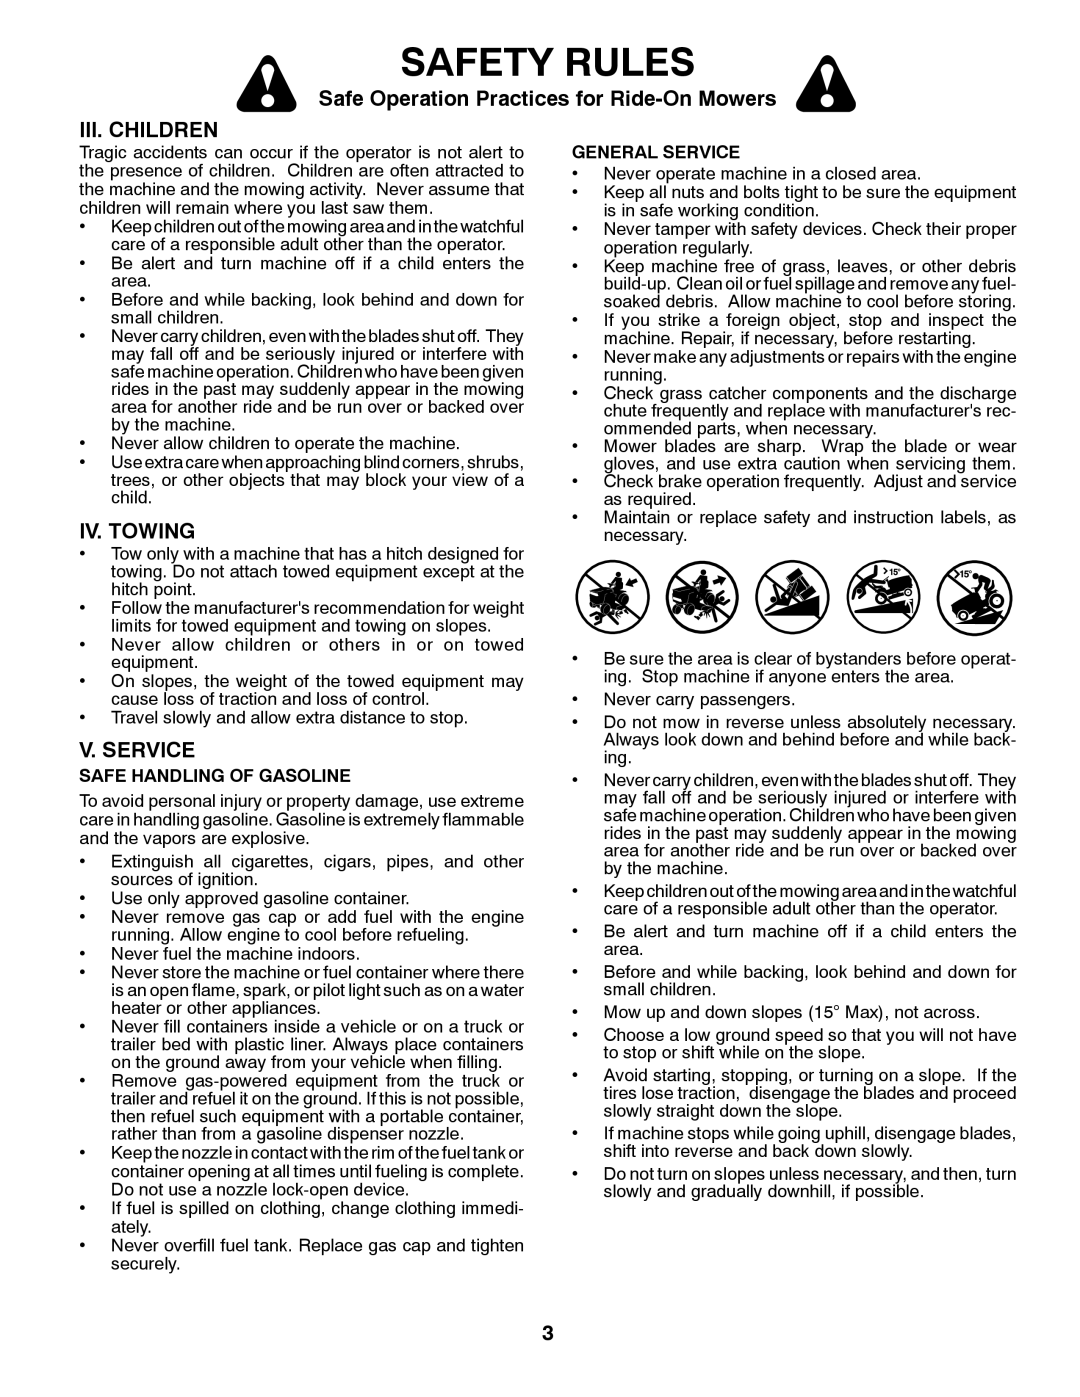 Husqvarna LGT24K54 Iii. Children, Iv. Towing, V. Service, Safety Rules, Safe Operation Practices for Ride-On Mowers 